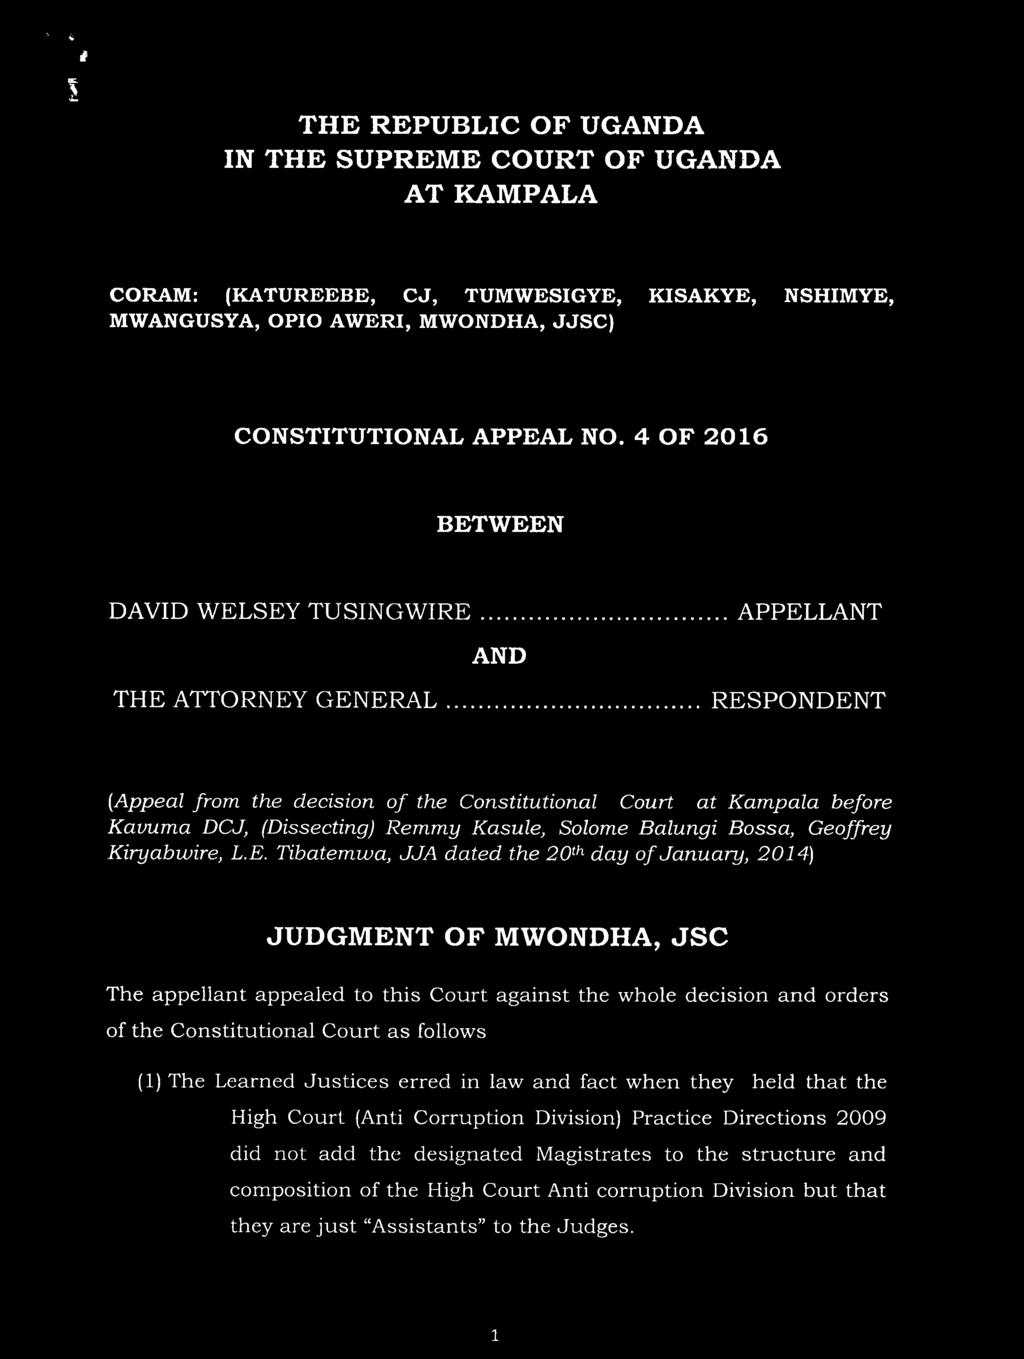 Tibatemwa, JJA dated the 20th day o f January, 2014) JUDGMENT OF MWONDHA, JSC The appellant appealed to this Court against the whole decision and orders of